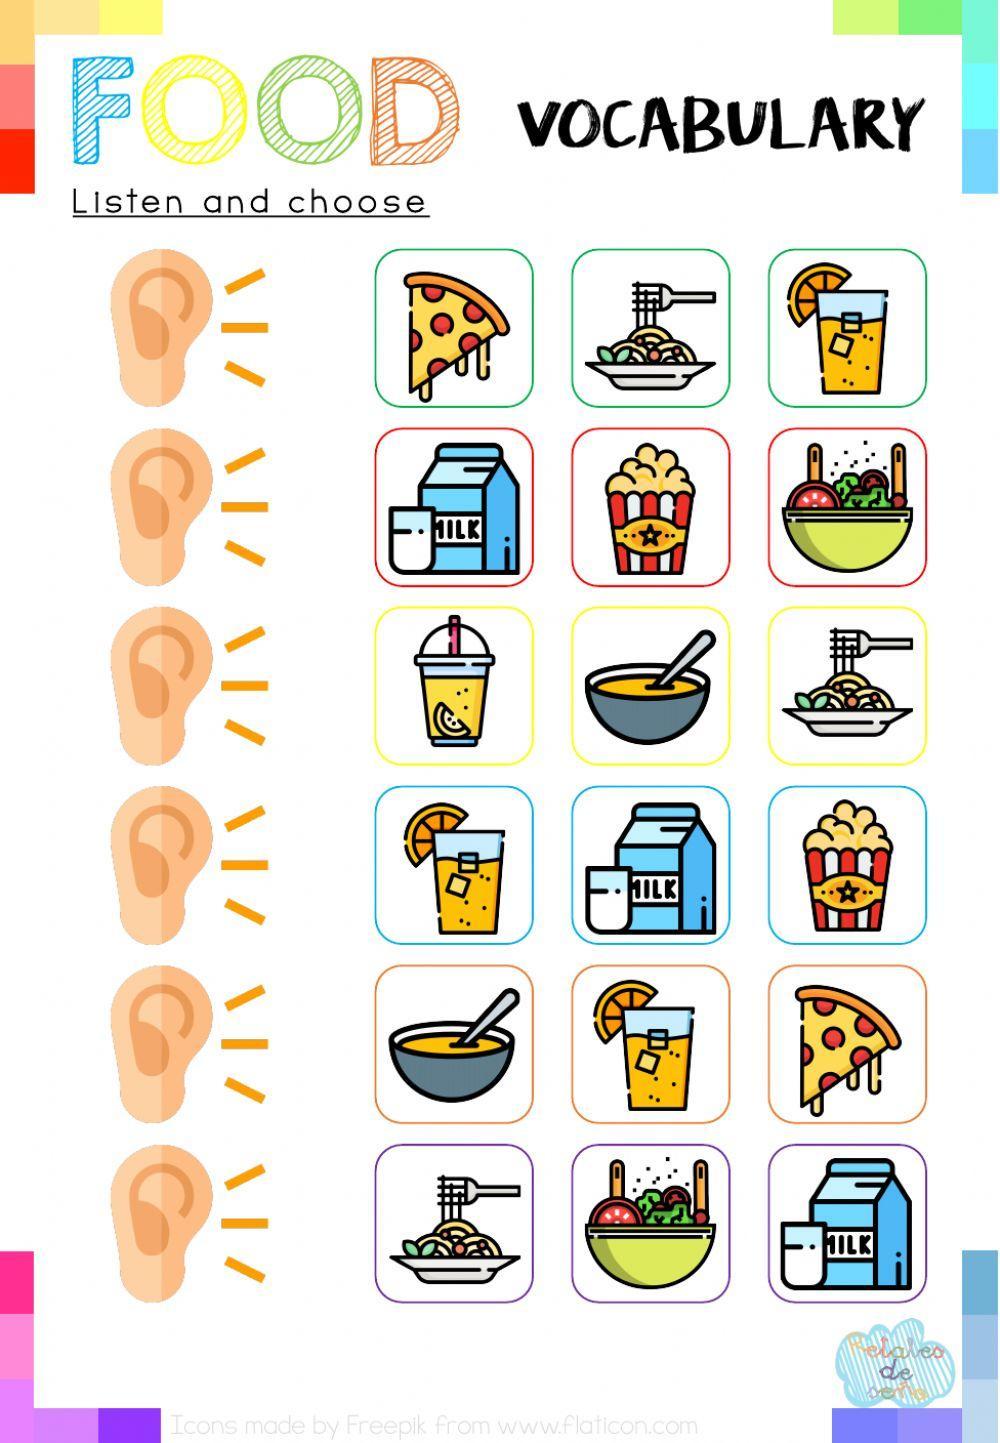 Listen and choose: Vocabulary food